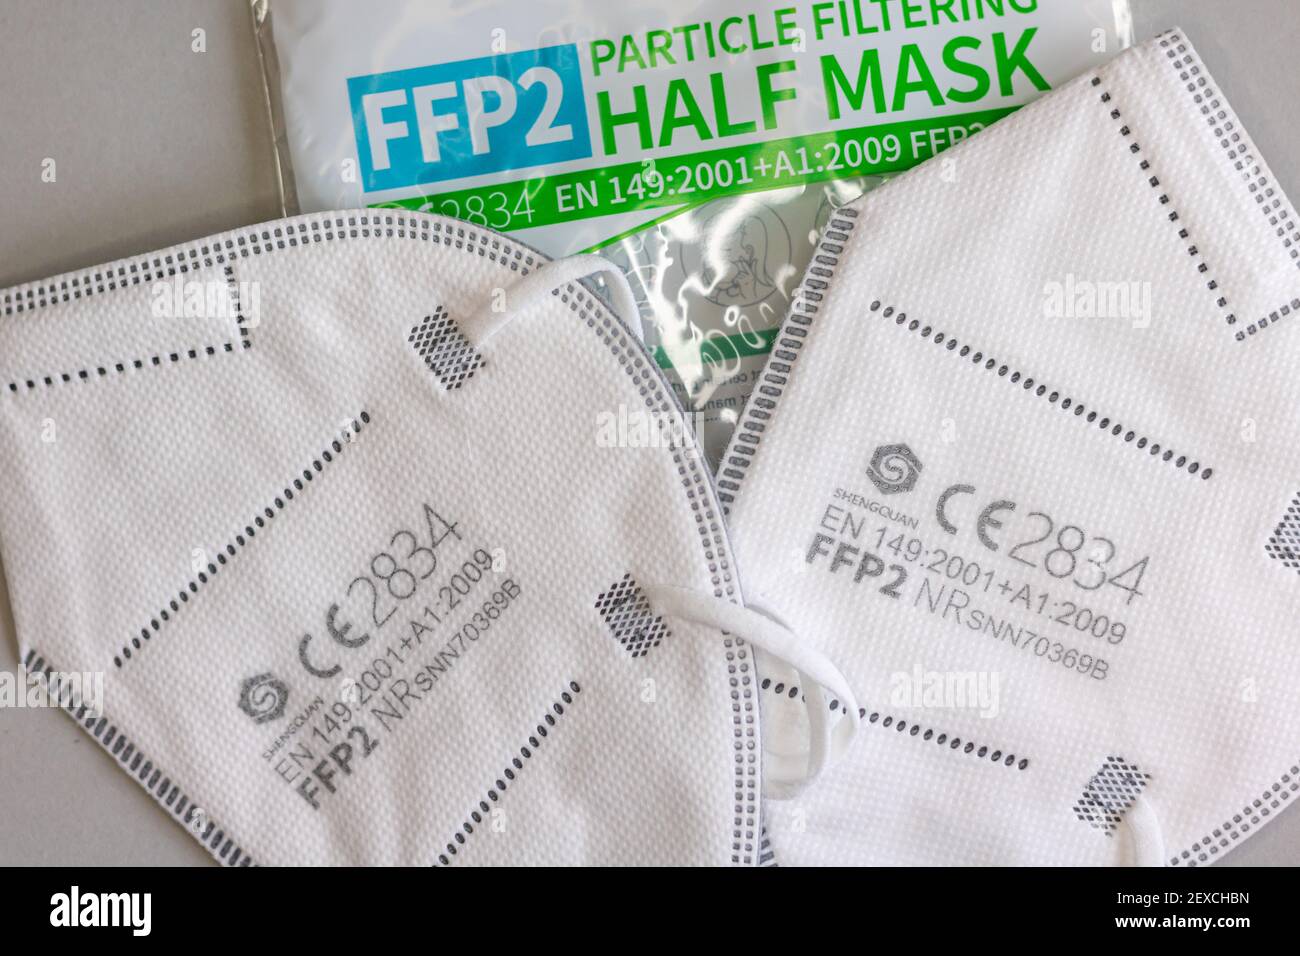 Neckargemund, Germany: March 4, 2021: Two FFP-2 masks and packaging for protection against aerosols e.g. against corona viruses with CE test seal on g Stock Photo